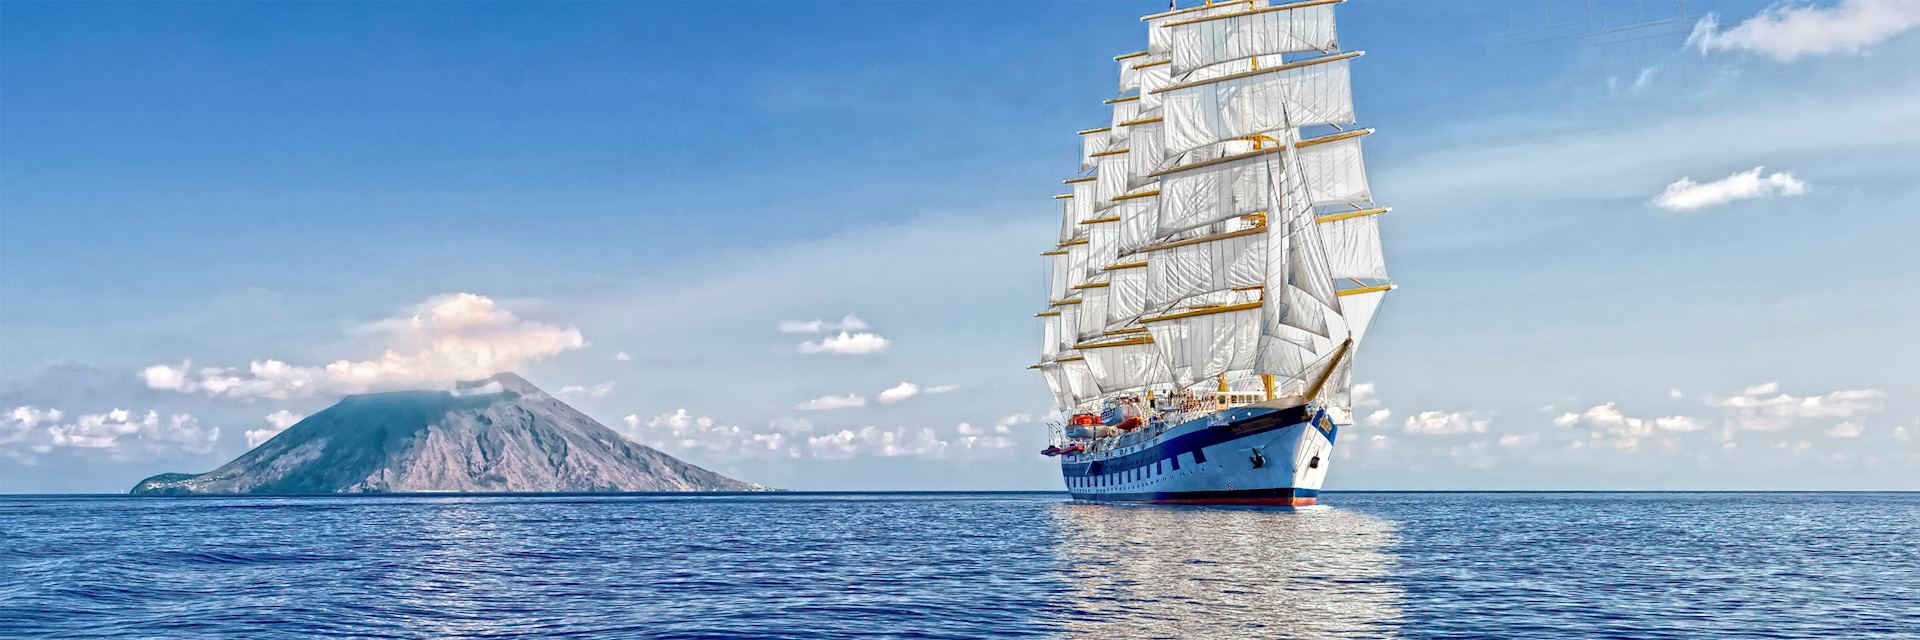 Royal Clipper in the Caribbean